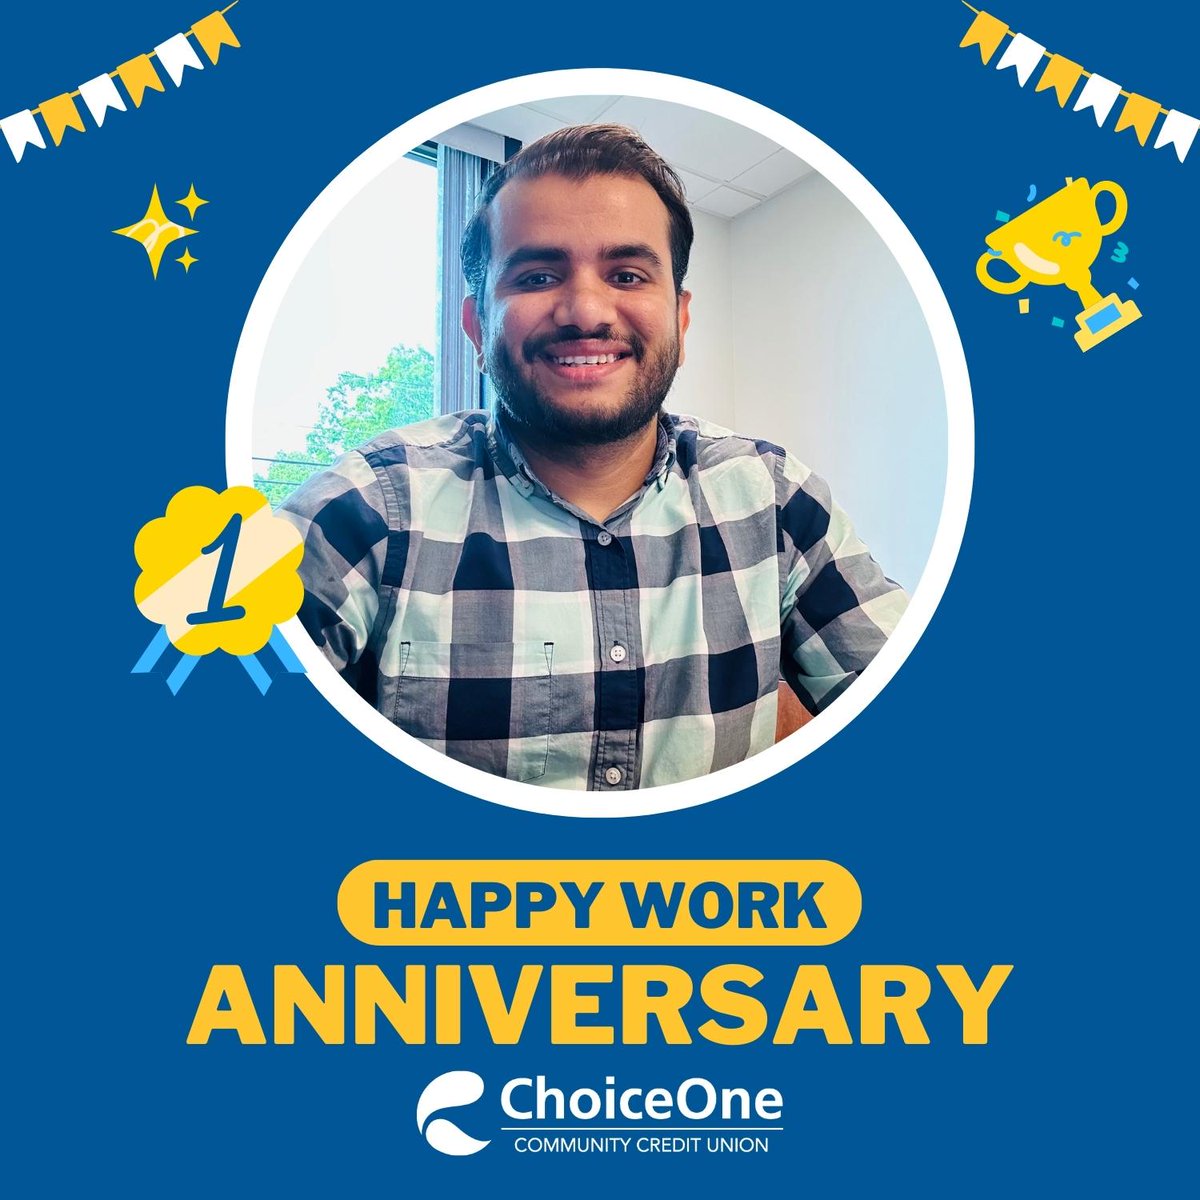 Join us in wishing Shalin Desai a Happy 1st Work Anniversary! Shalin, thank you for being part of OUR FAMILY!
🥳🎉
#OurFamily